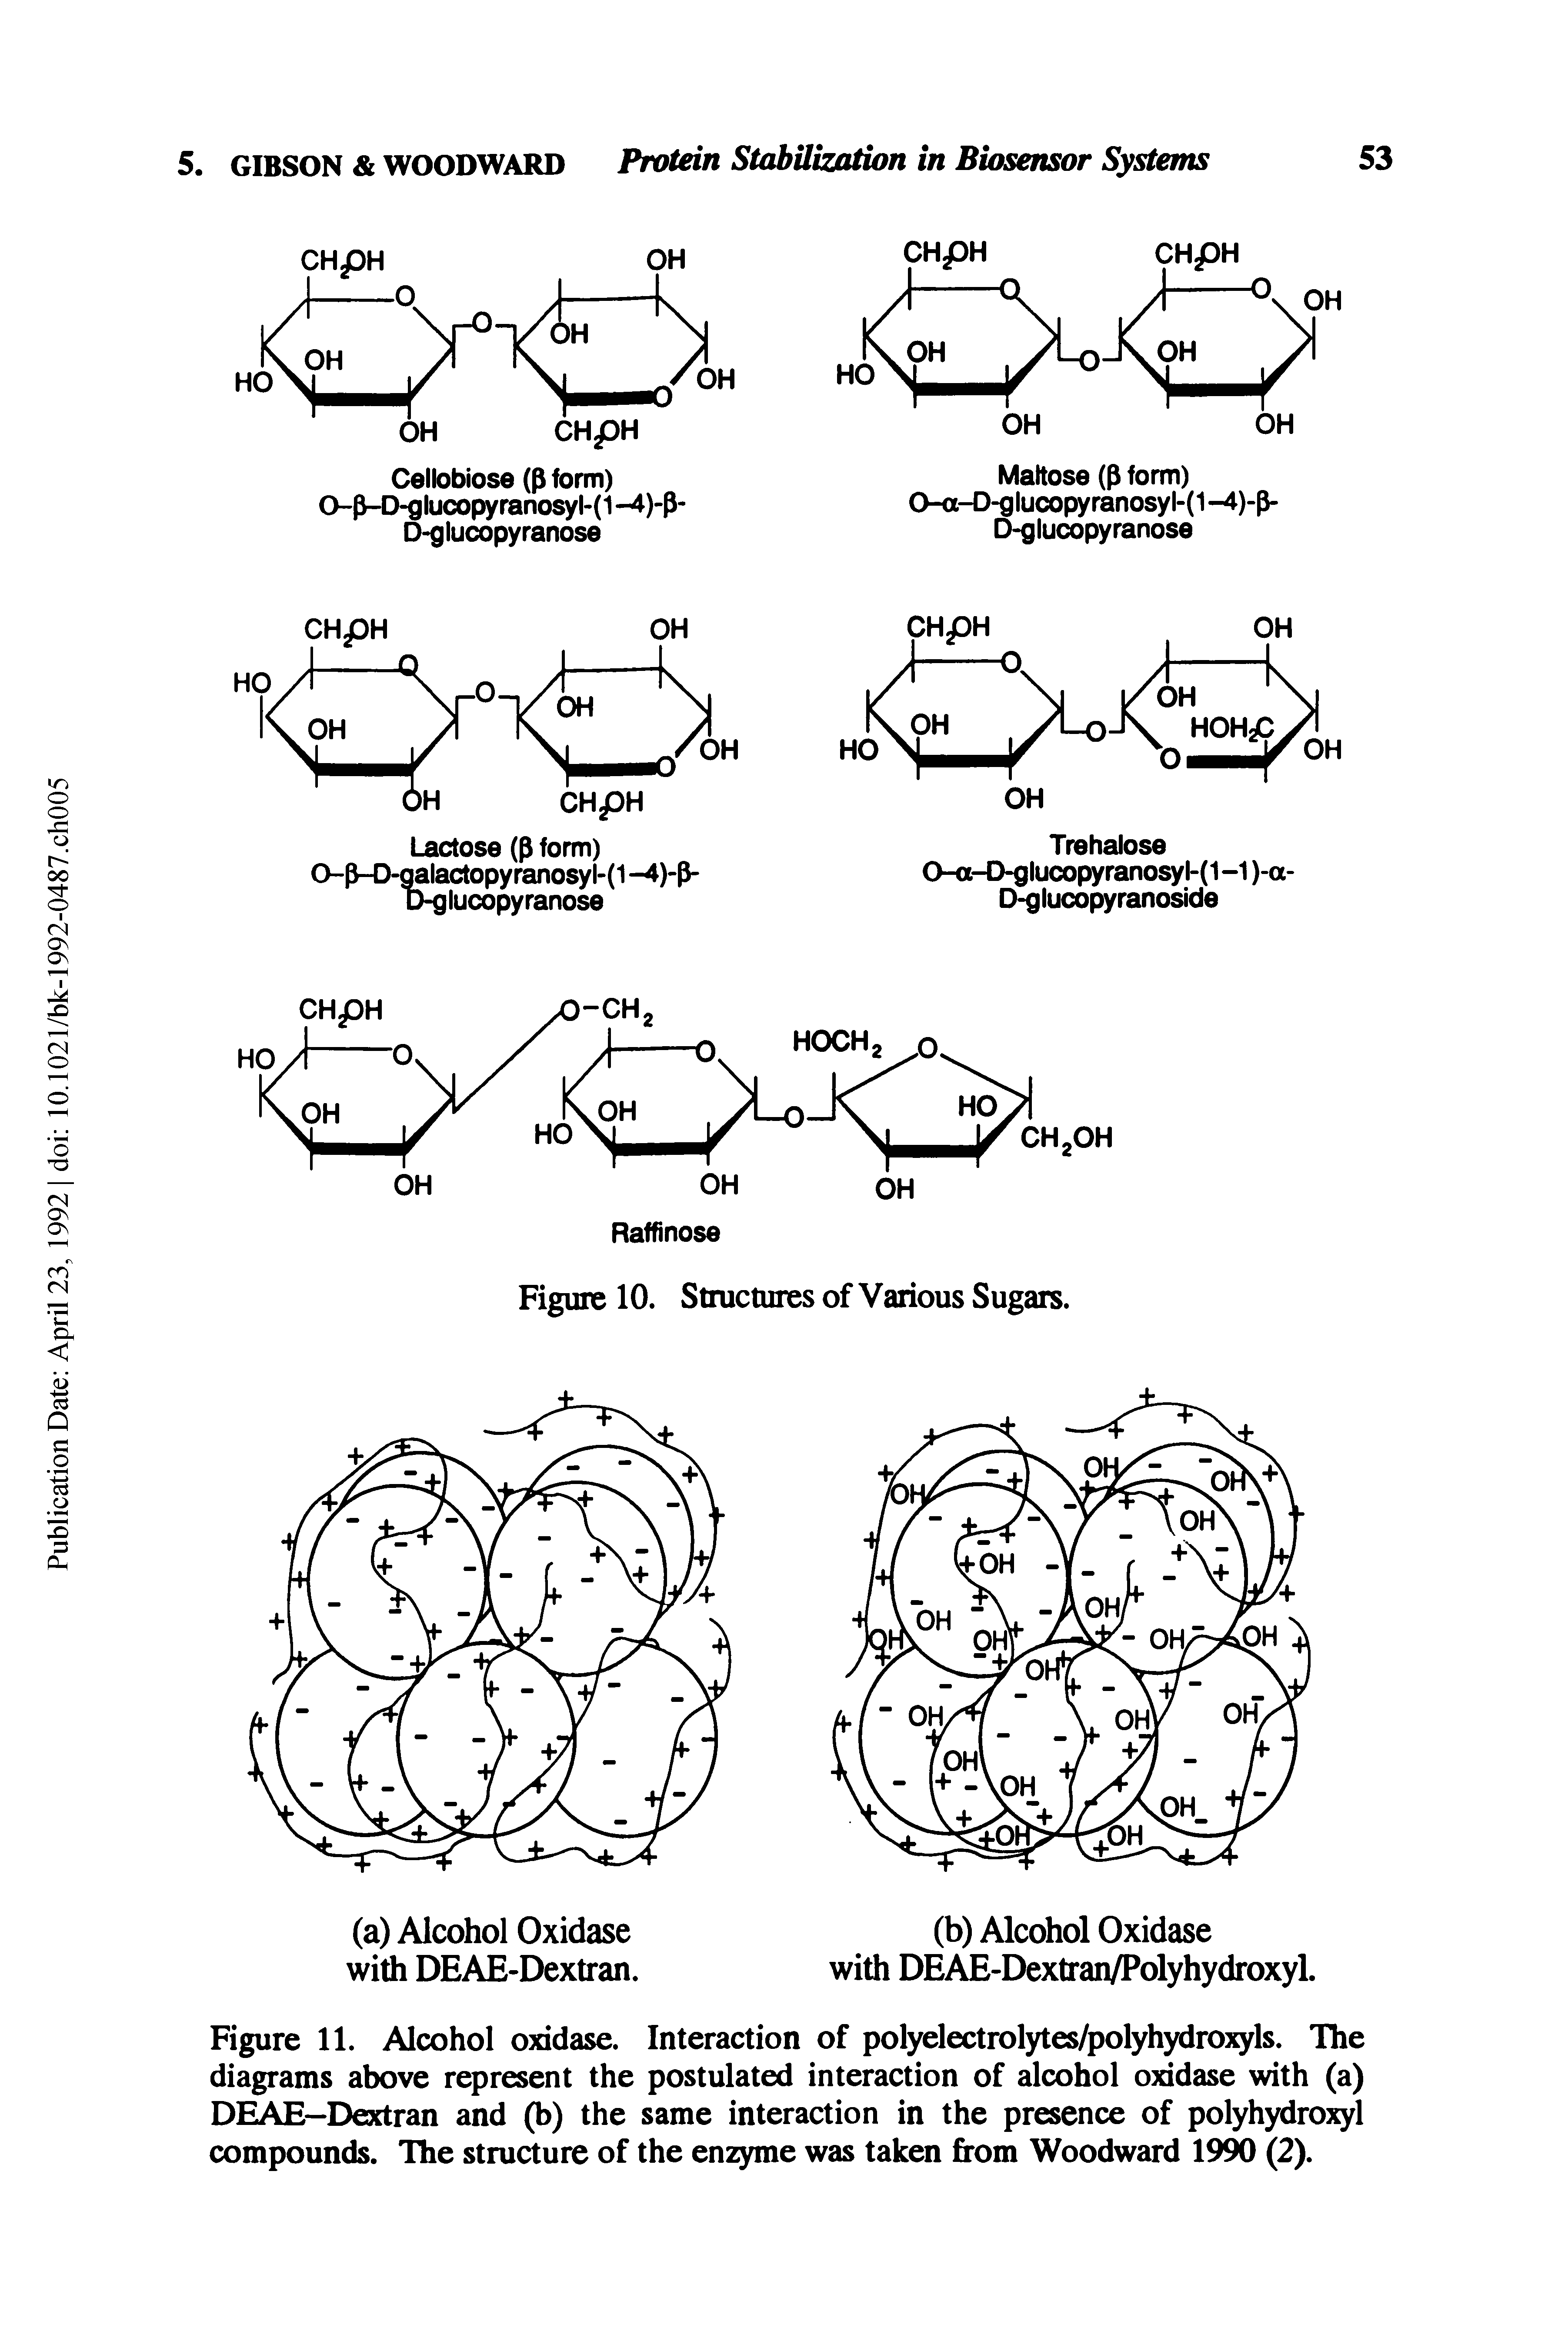 Figure 11. Alcohol oxidase. Interaction of polyelectrolytes/polyhydroxyls. The diagrams above represent the postulated interaction of alcohol oxidase with (a) DEAE—Dextran and (b) the same interaction in the presence of polyhydroxyl compounds. The structure of the enzyme was taken from Woodward 1990 (2).